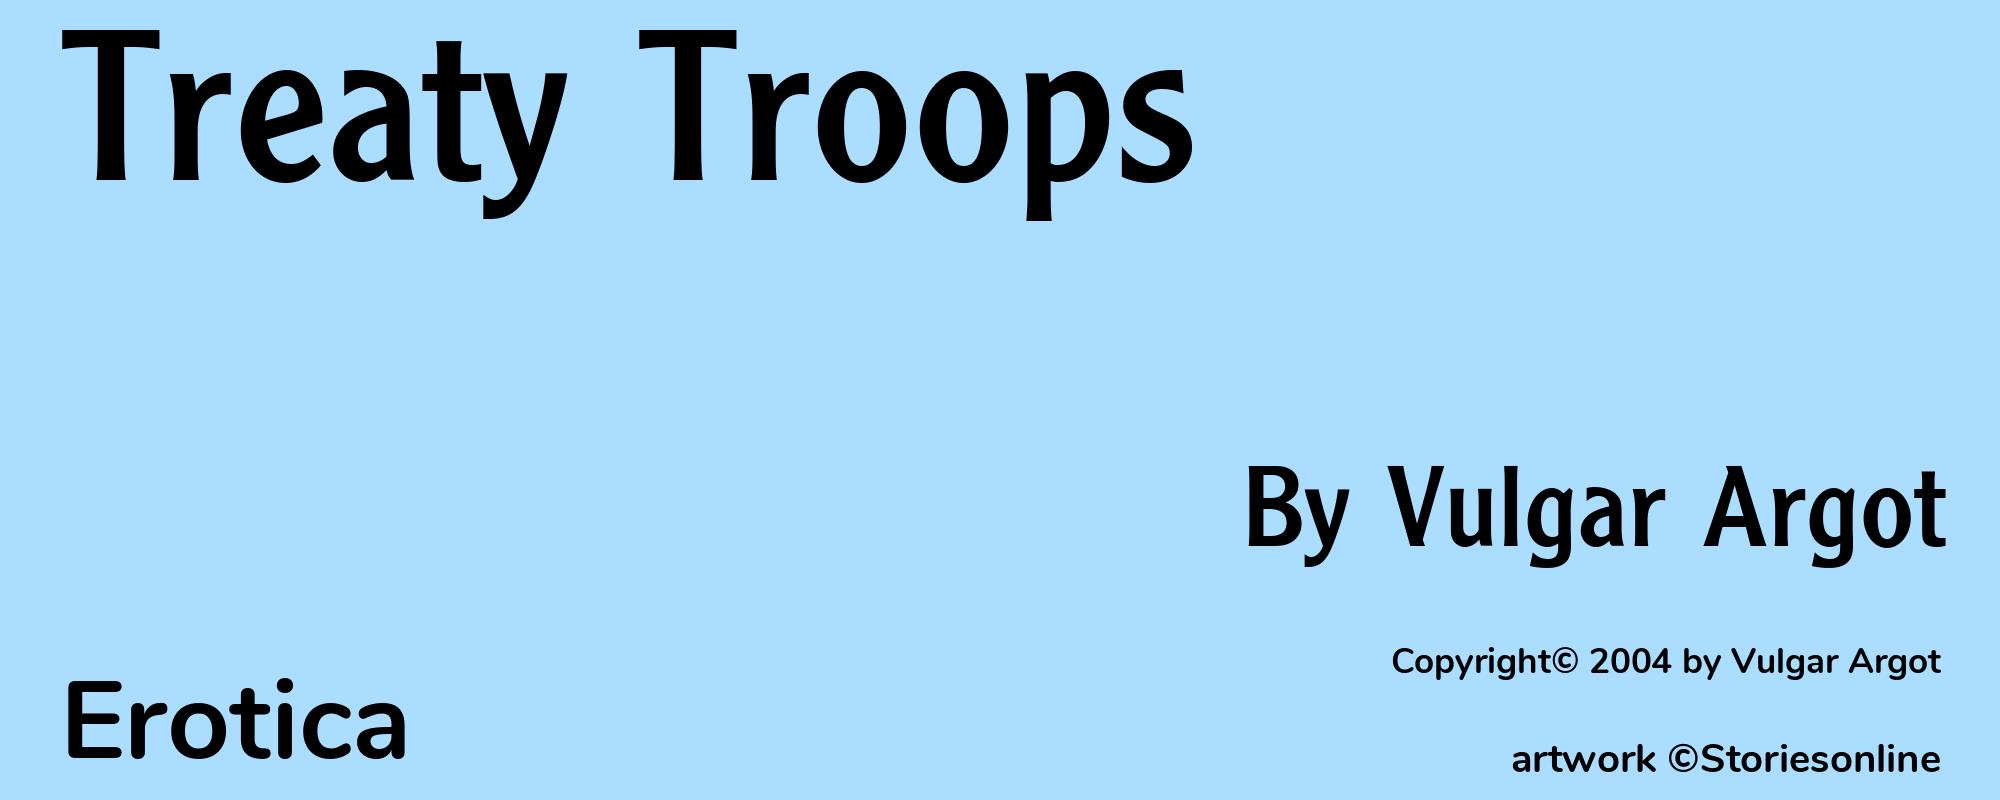 Treaty Troops - Cover